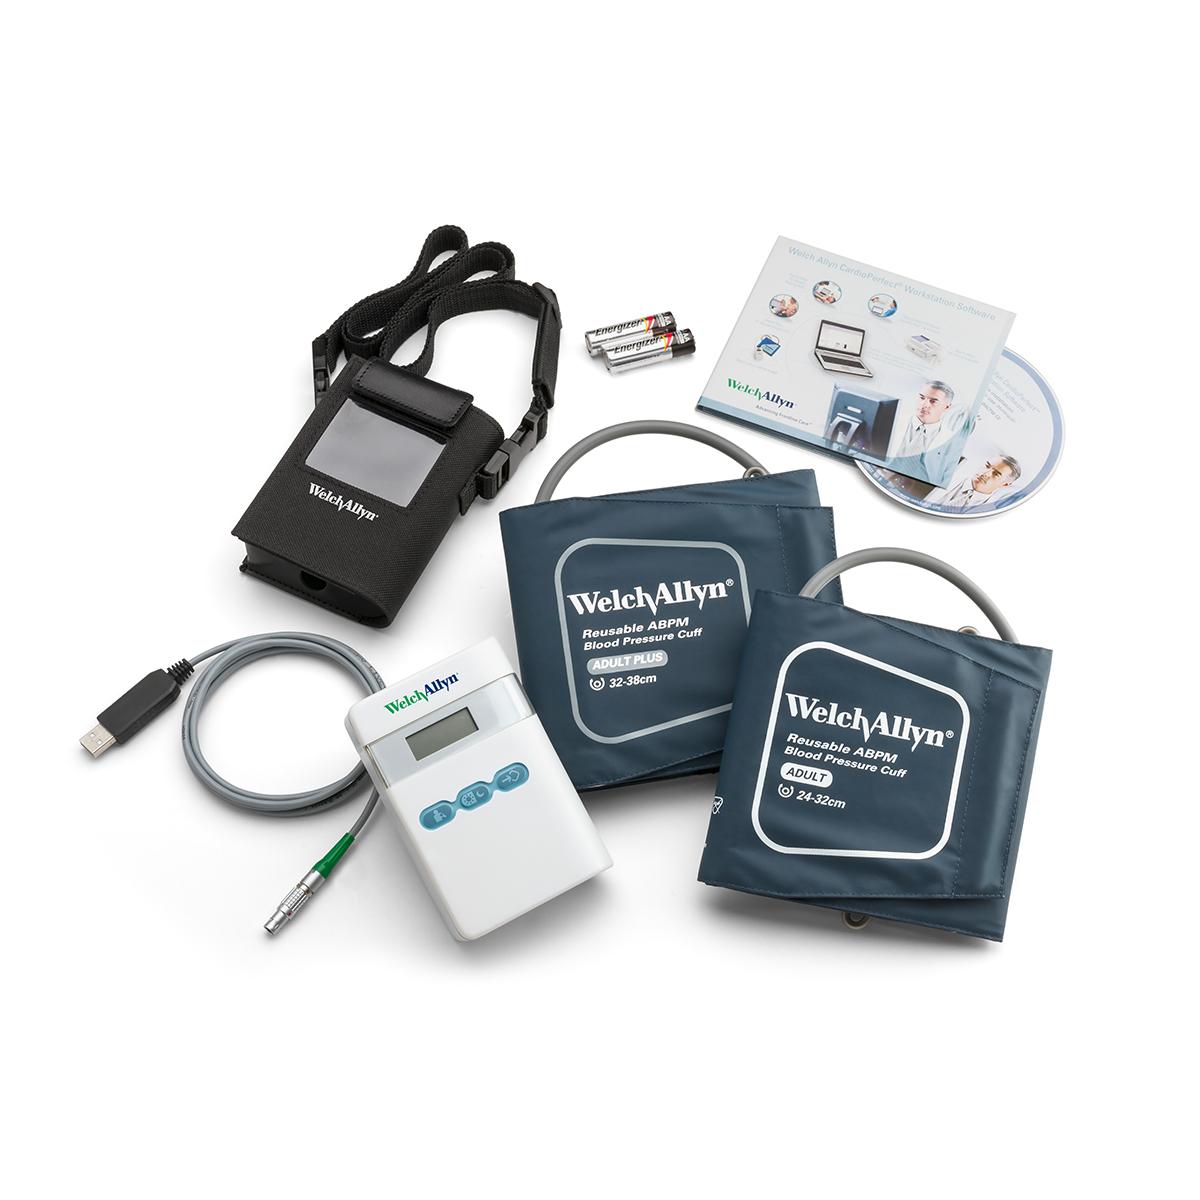 ABPM 7100 Ambulatory Blood Pressure Monitor and accessories on white background, overhead shot